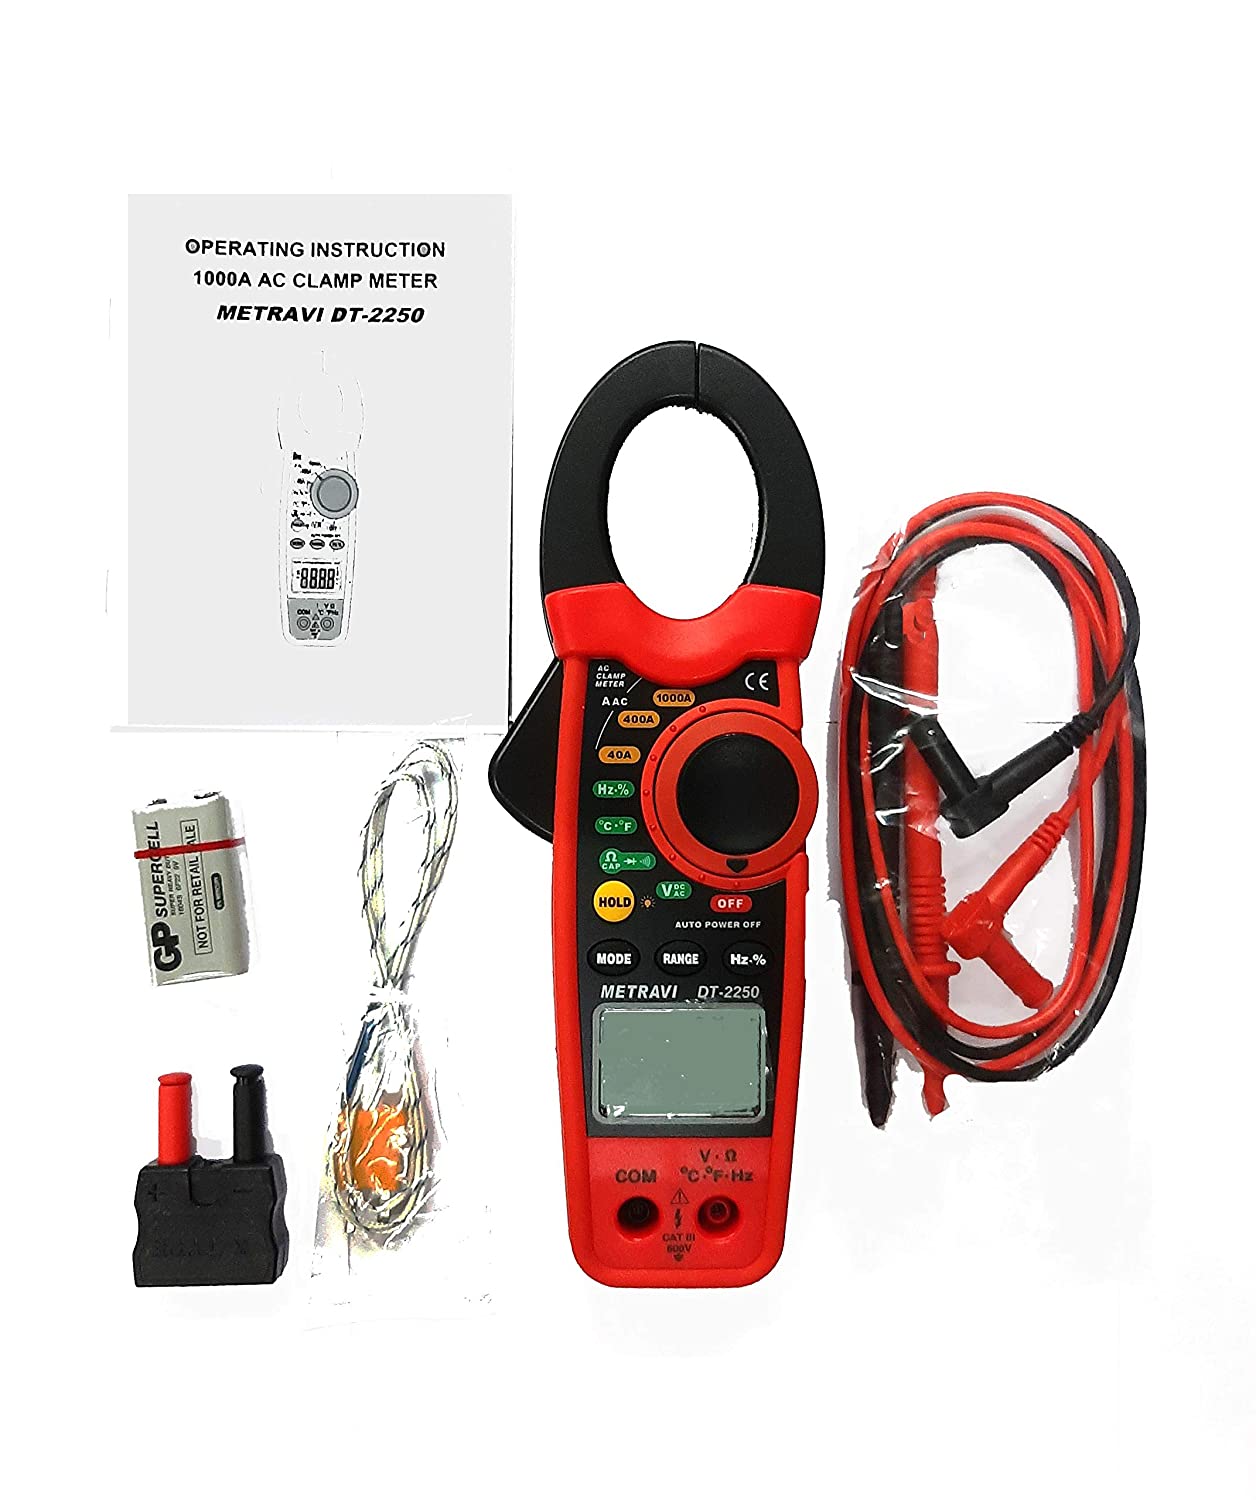 Metravi DT-2250 1000A AC Digital Clamp Meter with 30mm Jaw Size